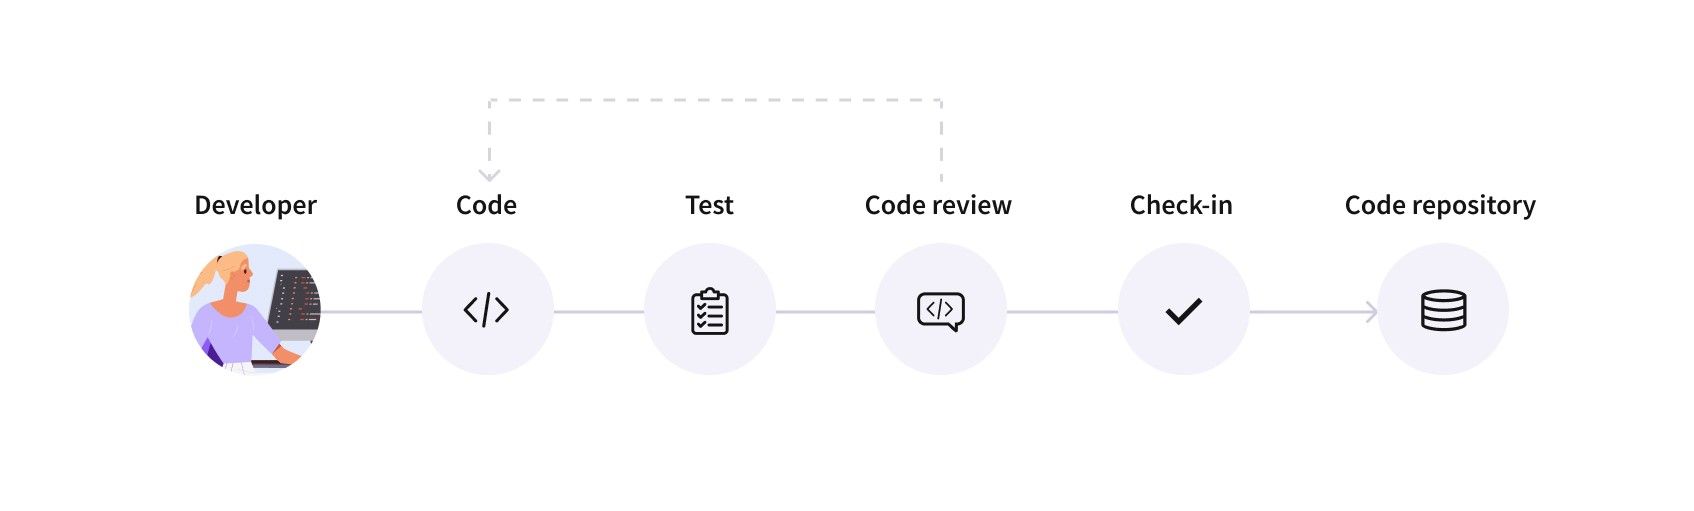 securing code review in the software development lifecycle